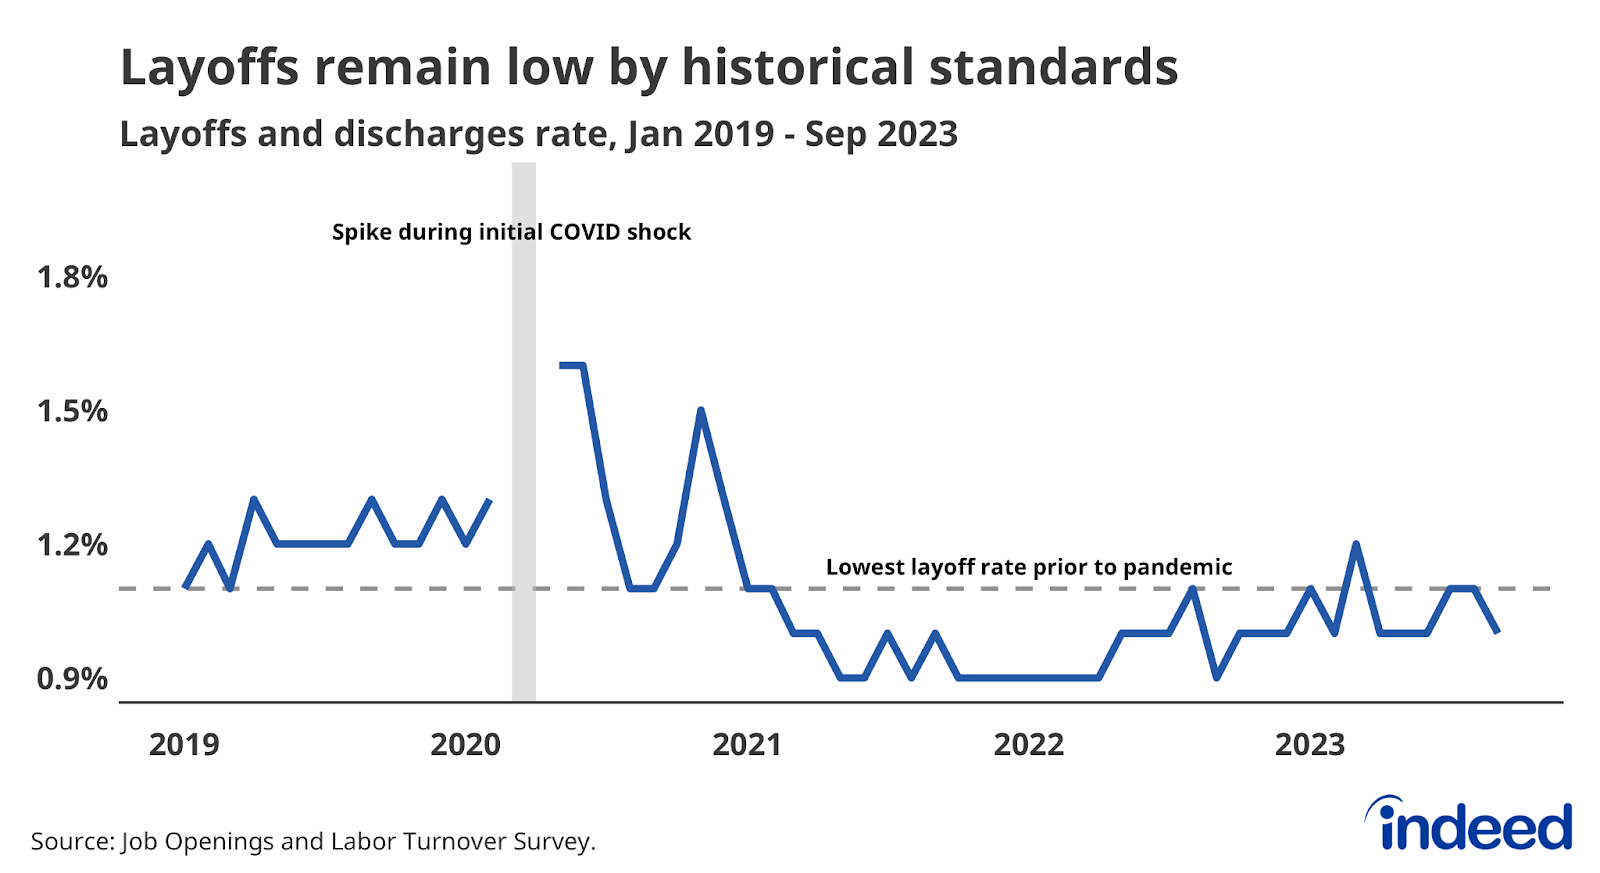 A line graph titled “Layoffs remain low by historical standards” shows the layoffs and discharges rate from January 2019 to September 2023. The vertical axis spans from 0.9% to 1.8%. The current layoff rate of 1% remains below the lowest layoff rate prior to the pandemic.